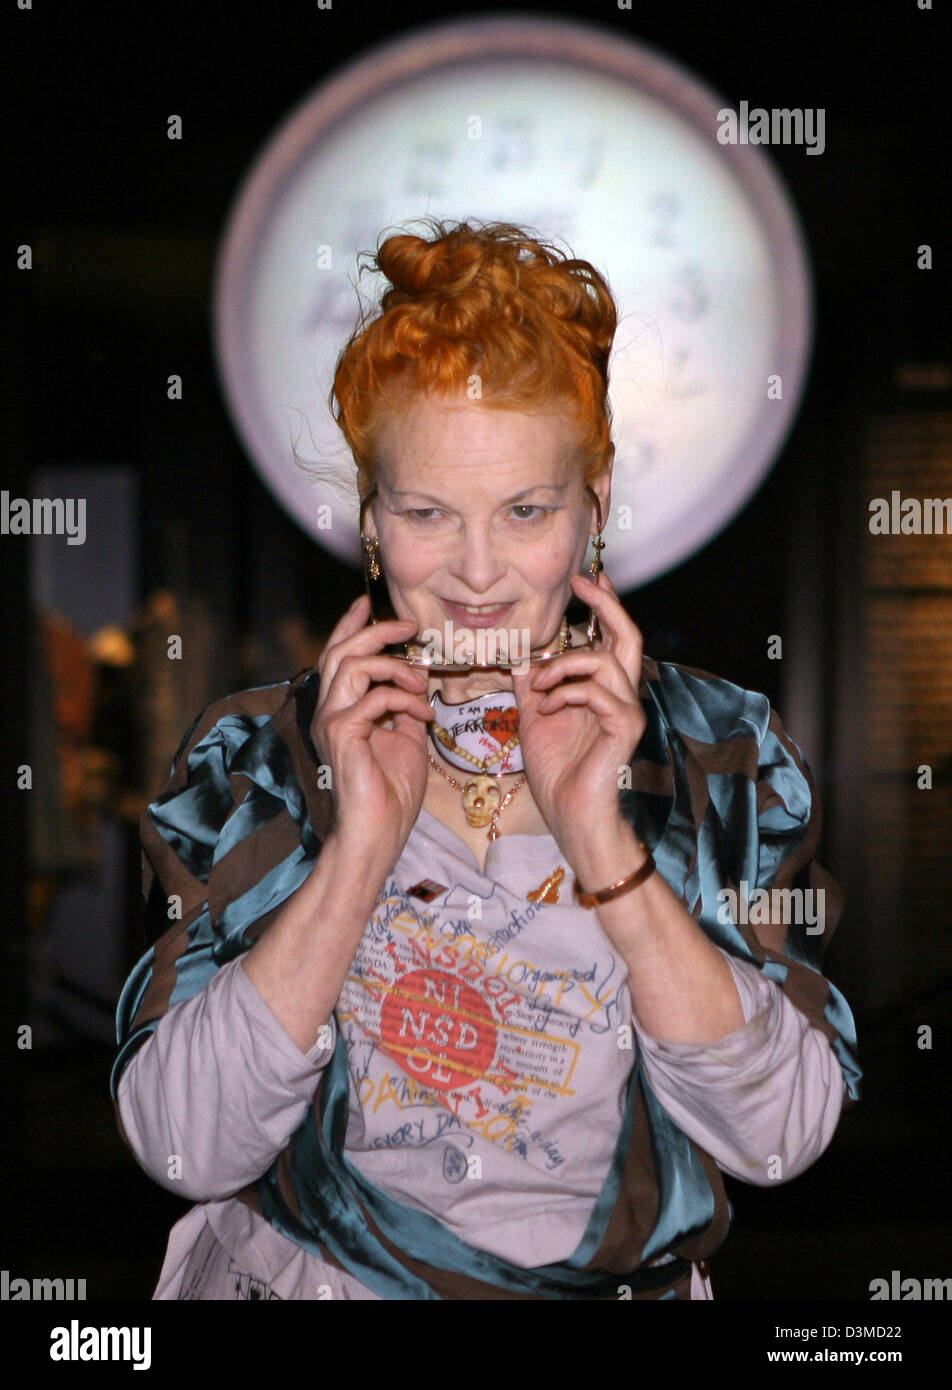 British fashion designer Vivienne Westwood pictured at the exhibition centre 'NRW-Forum Kultur und Wirtschaft' in Duesseldorf, Germany, Friday, 03 Feburary 2006. In the background a backwards running clock, which used to hang above Westwood's first shop. Vivienne Westwood arrived for a press conference regarding her exhibition featuring a retrospective of her women's fashion design Stock Photo